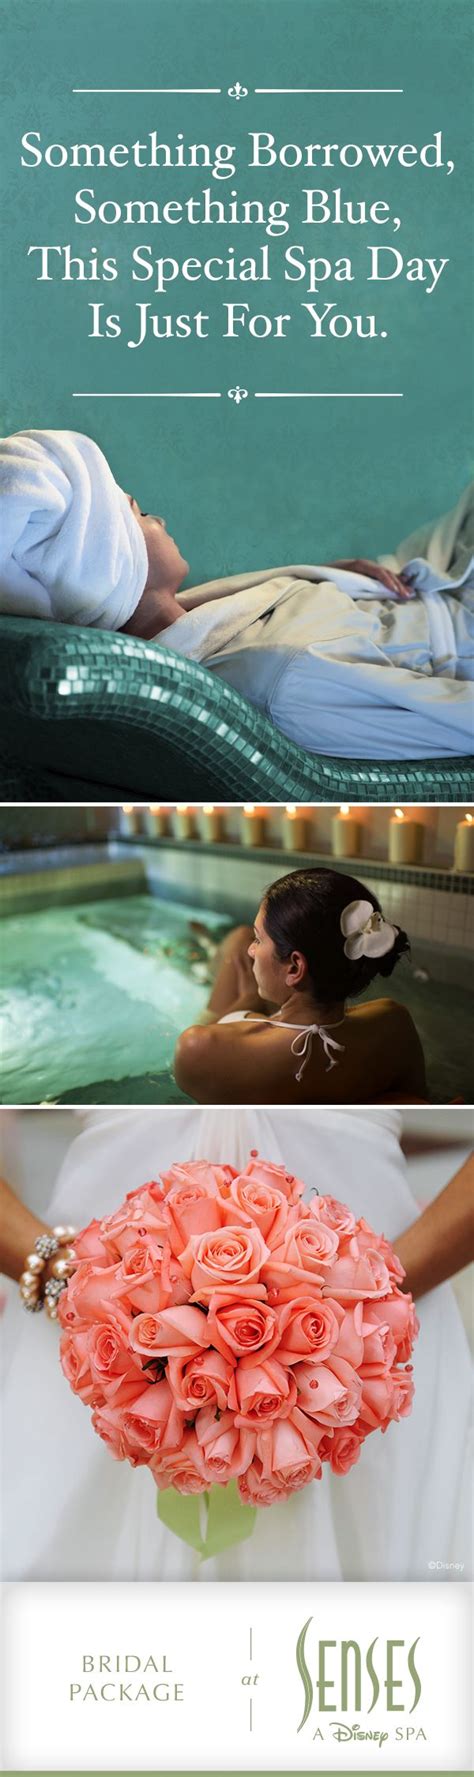 10 Best Images About Spa T Ideas For Weddings And Brides On Pinterest Timeline Hot Air